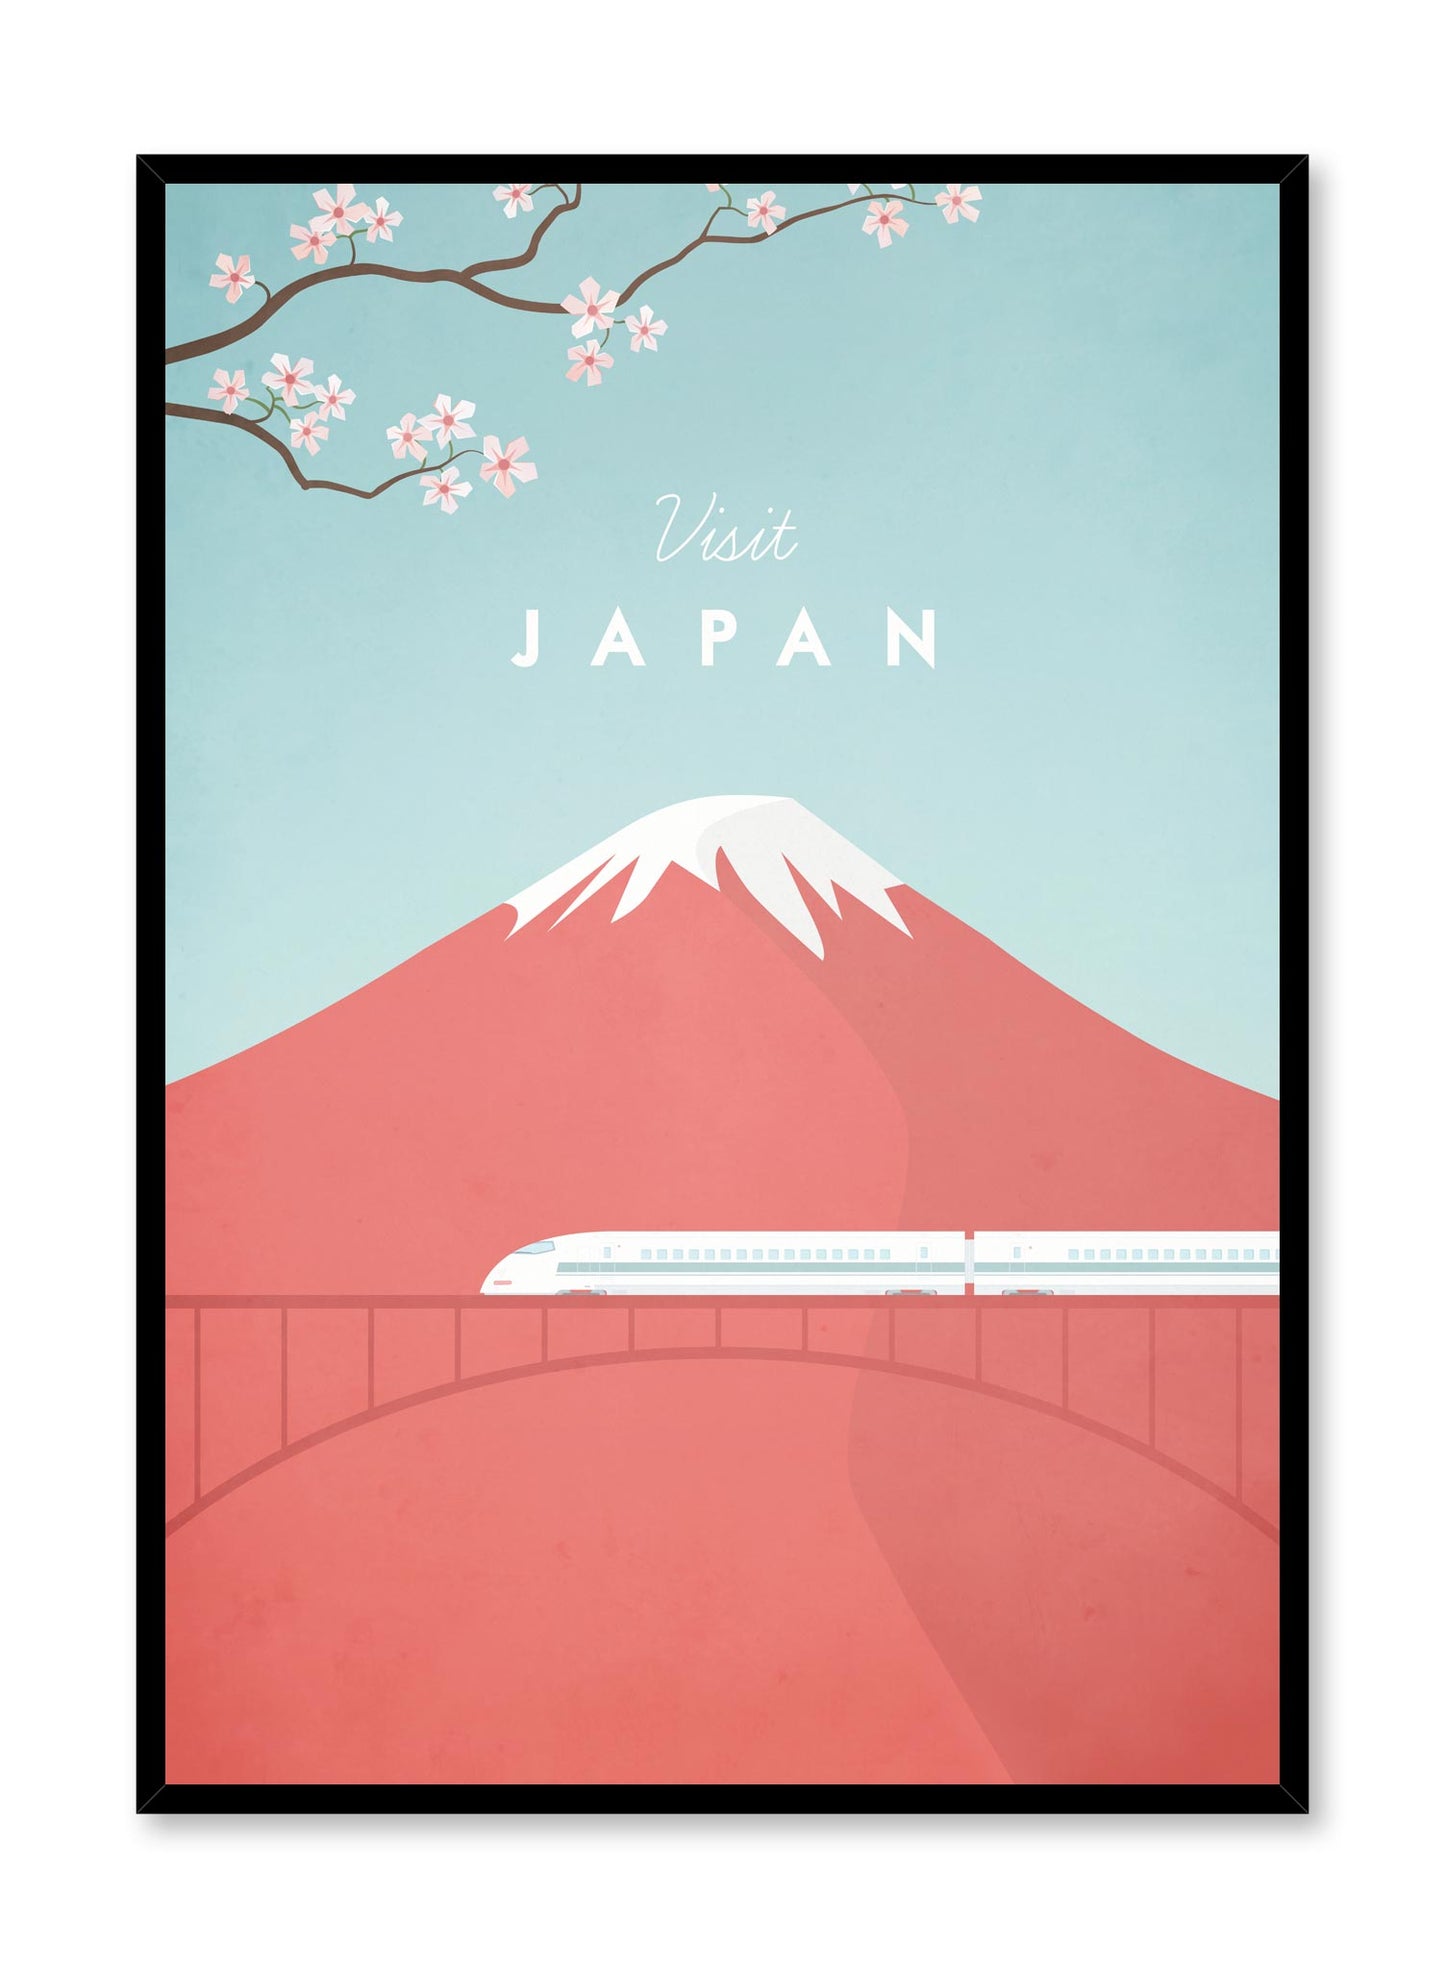 Modern minimalist travel poster by Opposite Wall with illustration of Japan